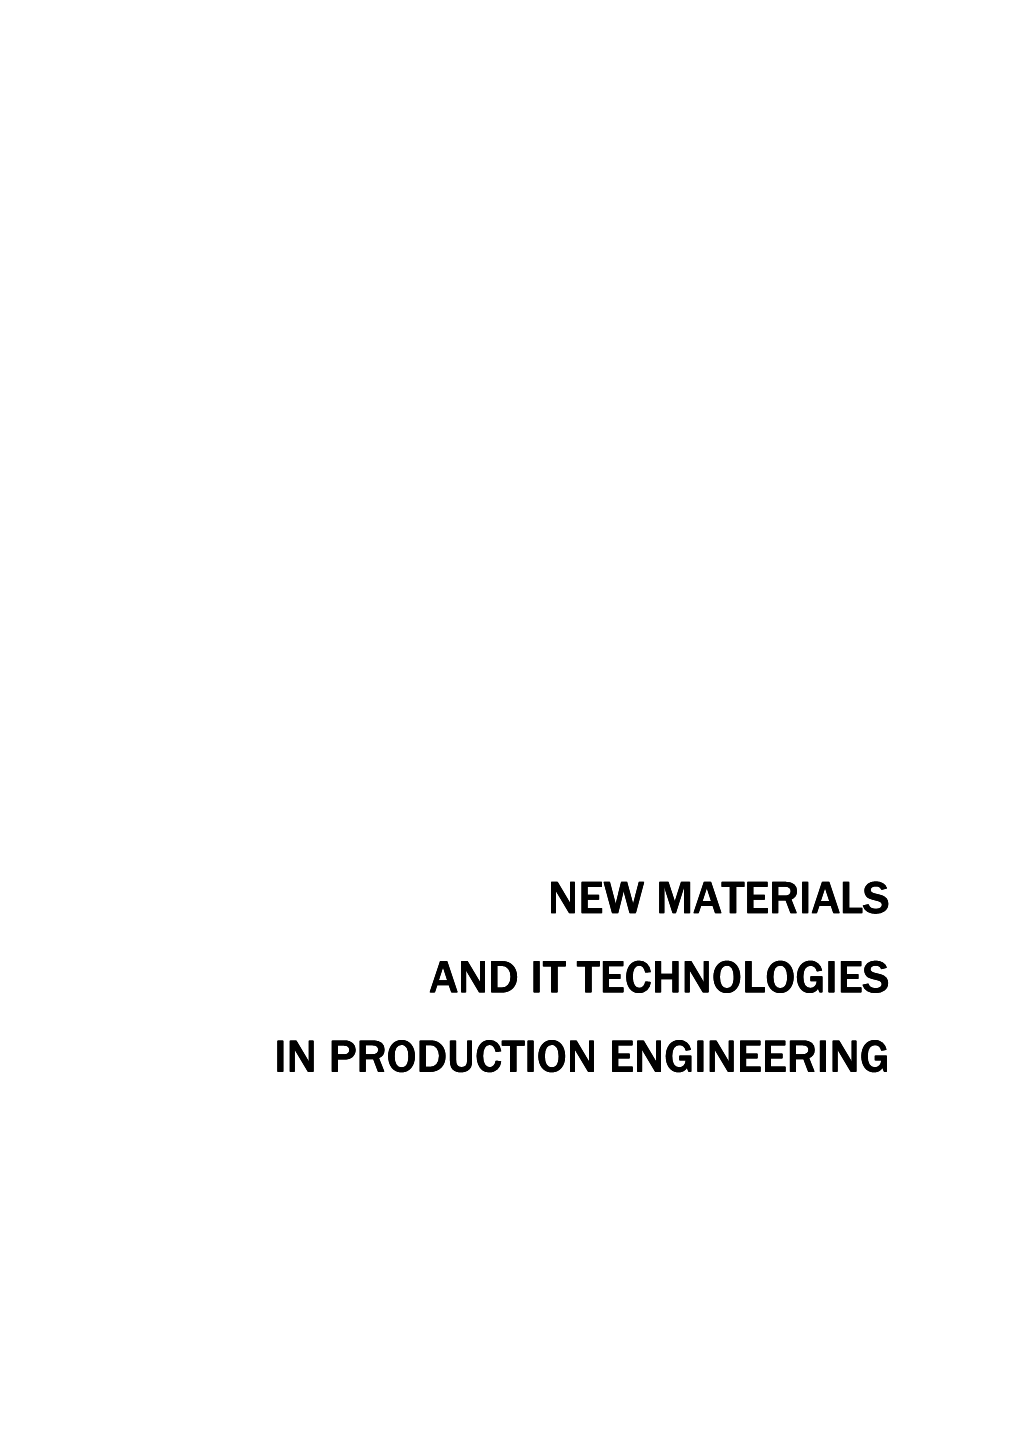 New Materials and IT Technologies in Production Engineering